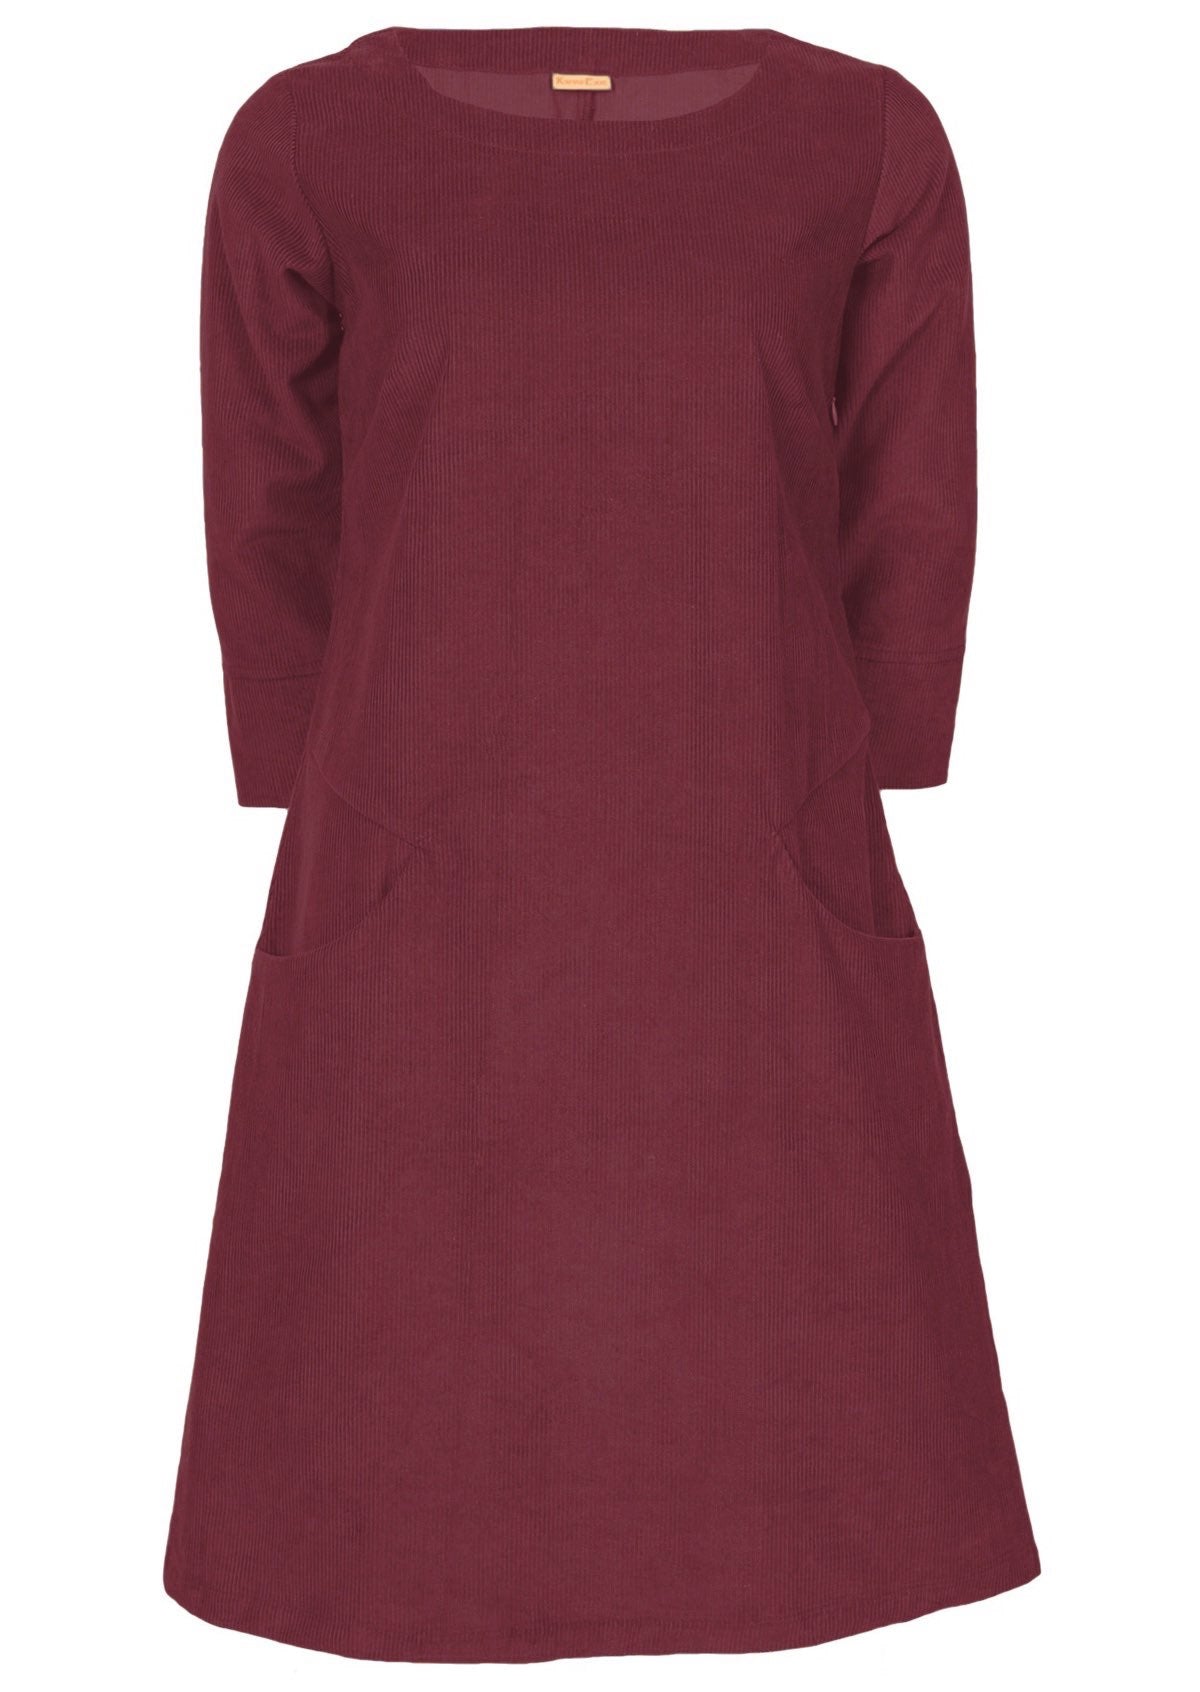 Rich red Jamie 100% cotton corduroy dress with mid length sleeves. 